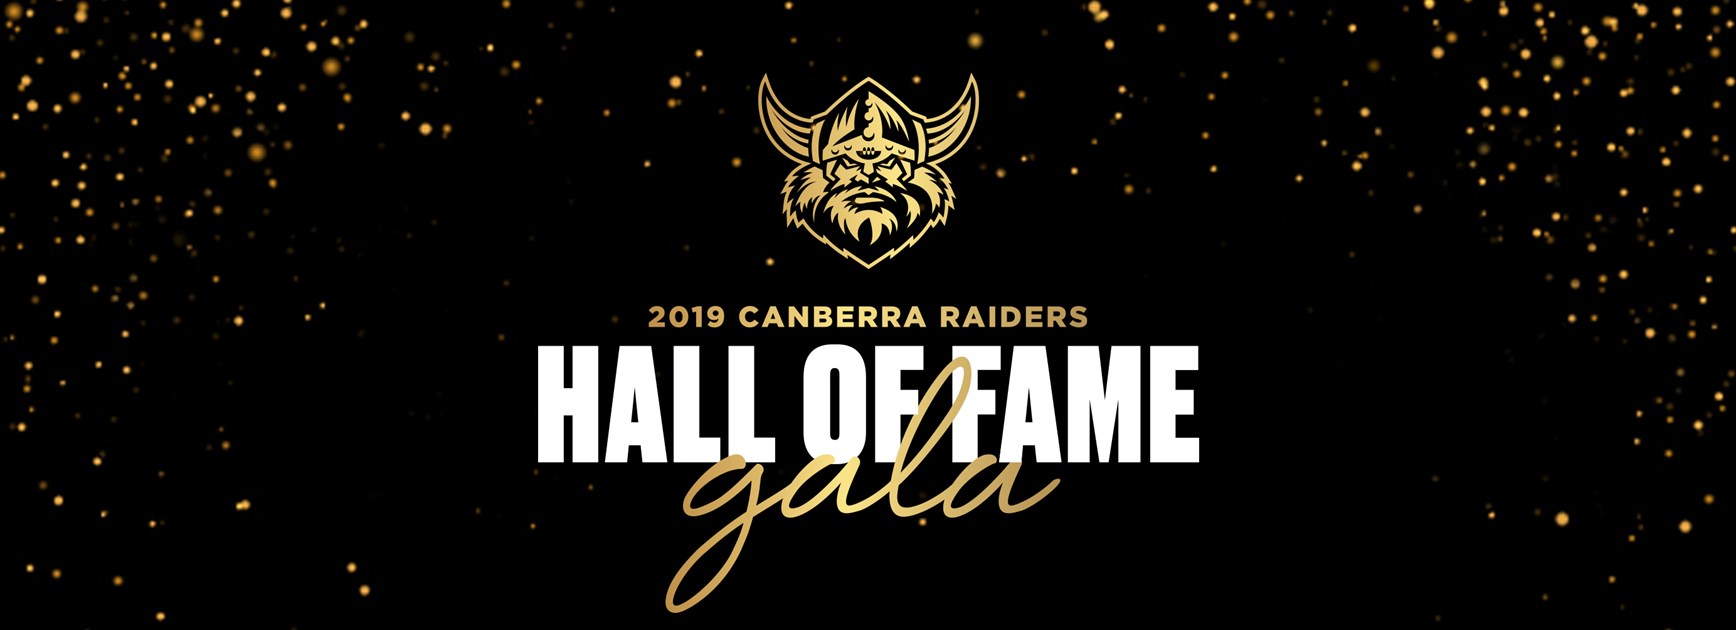 Three more Raiders legends inducted into Hall of Fame